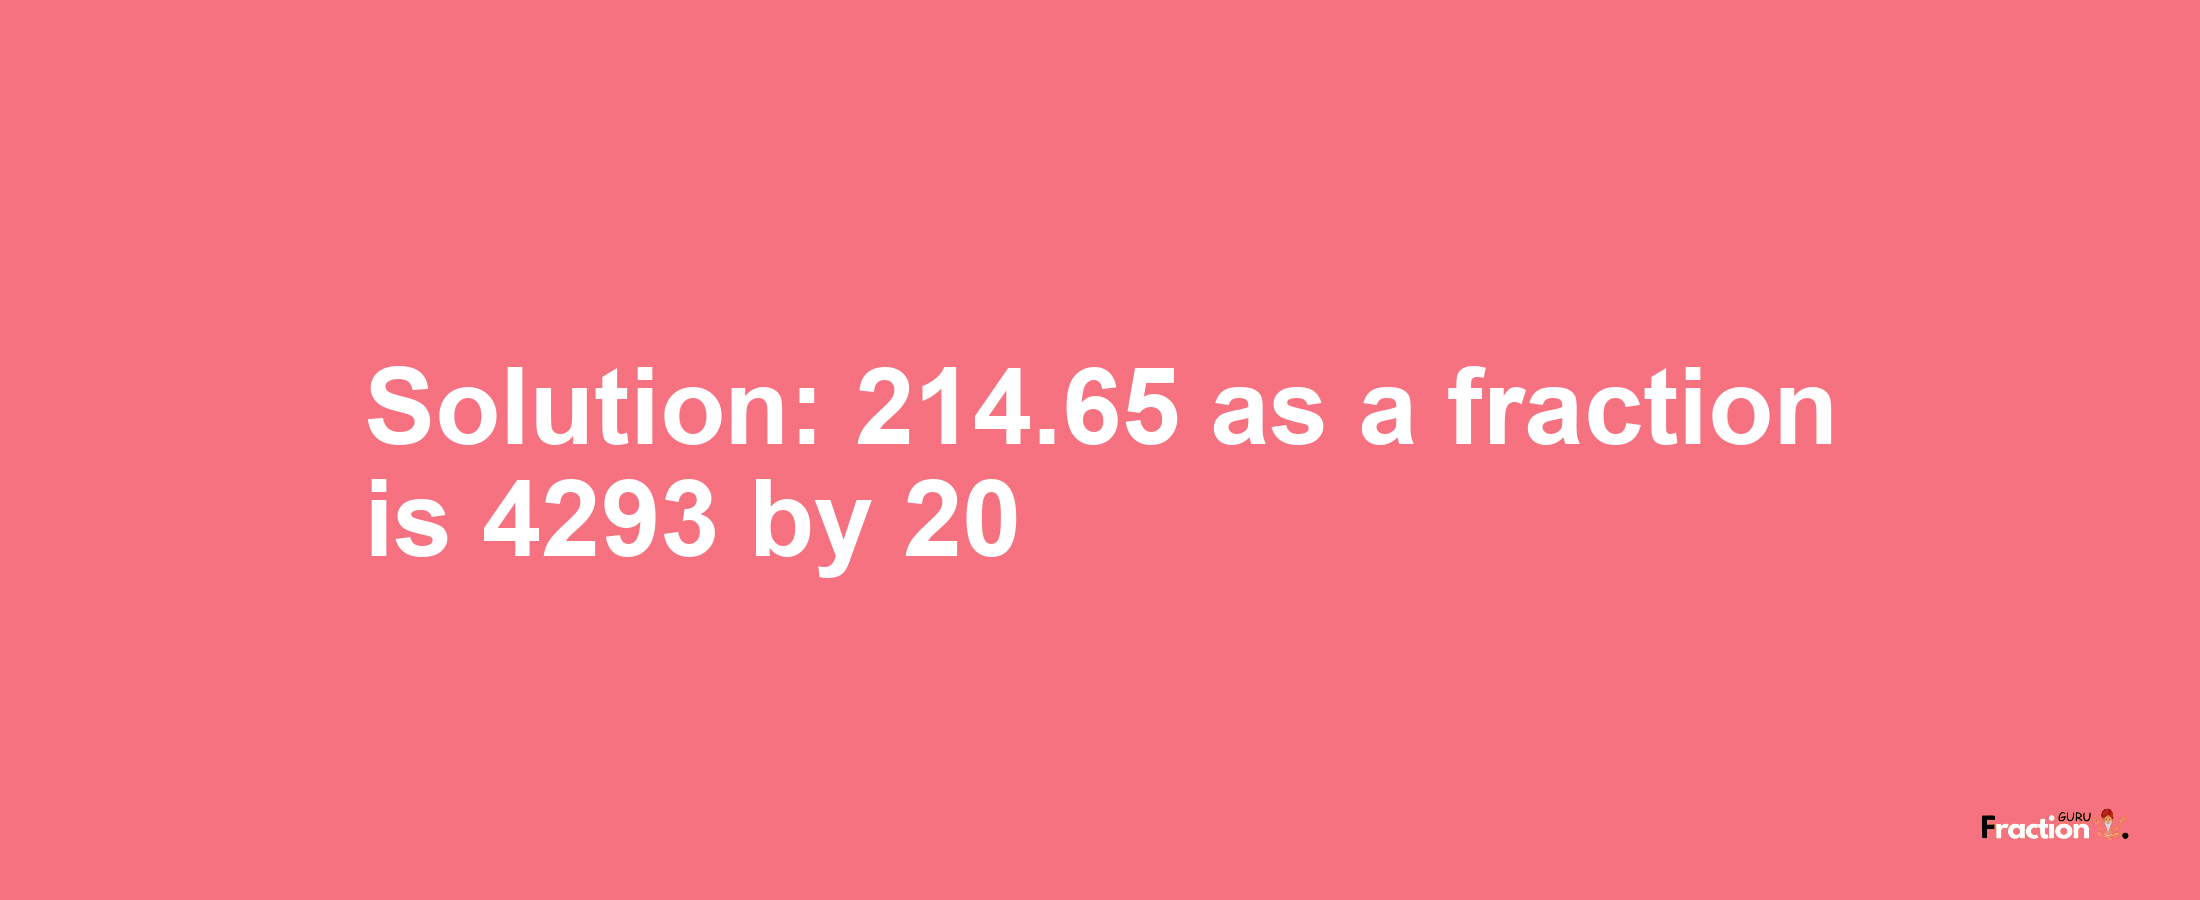 Solution:214.65 as a fraction is 4293/20